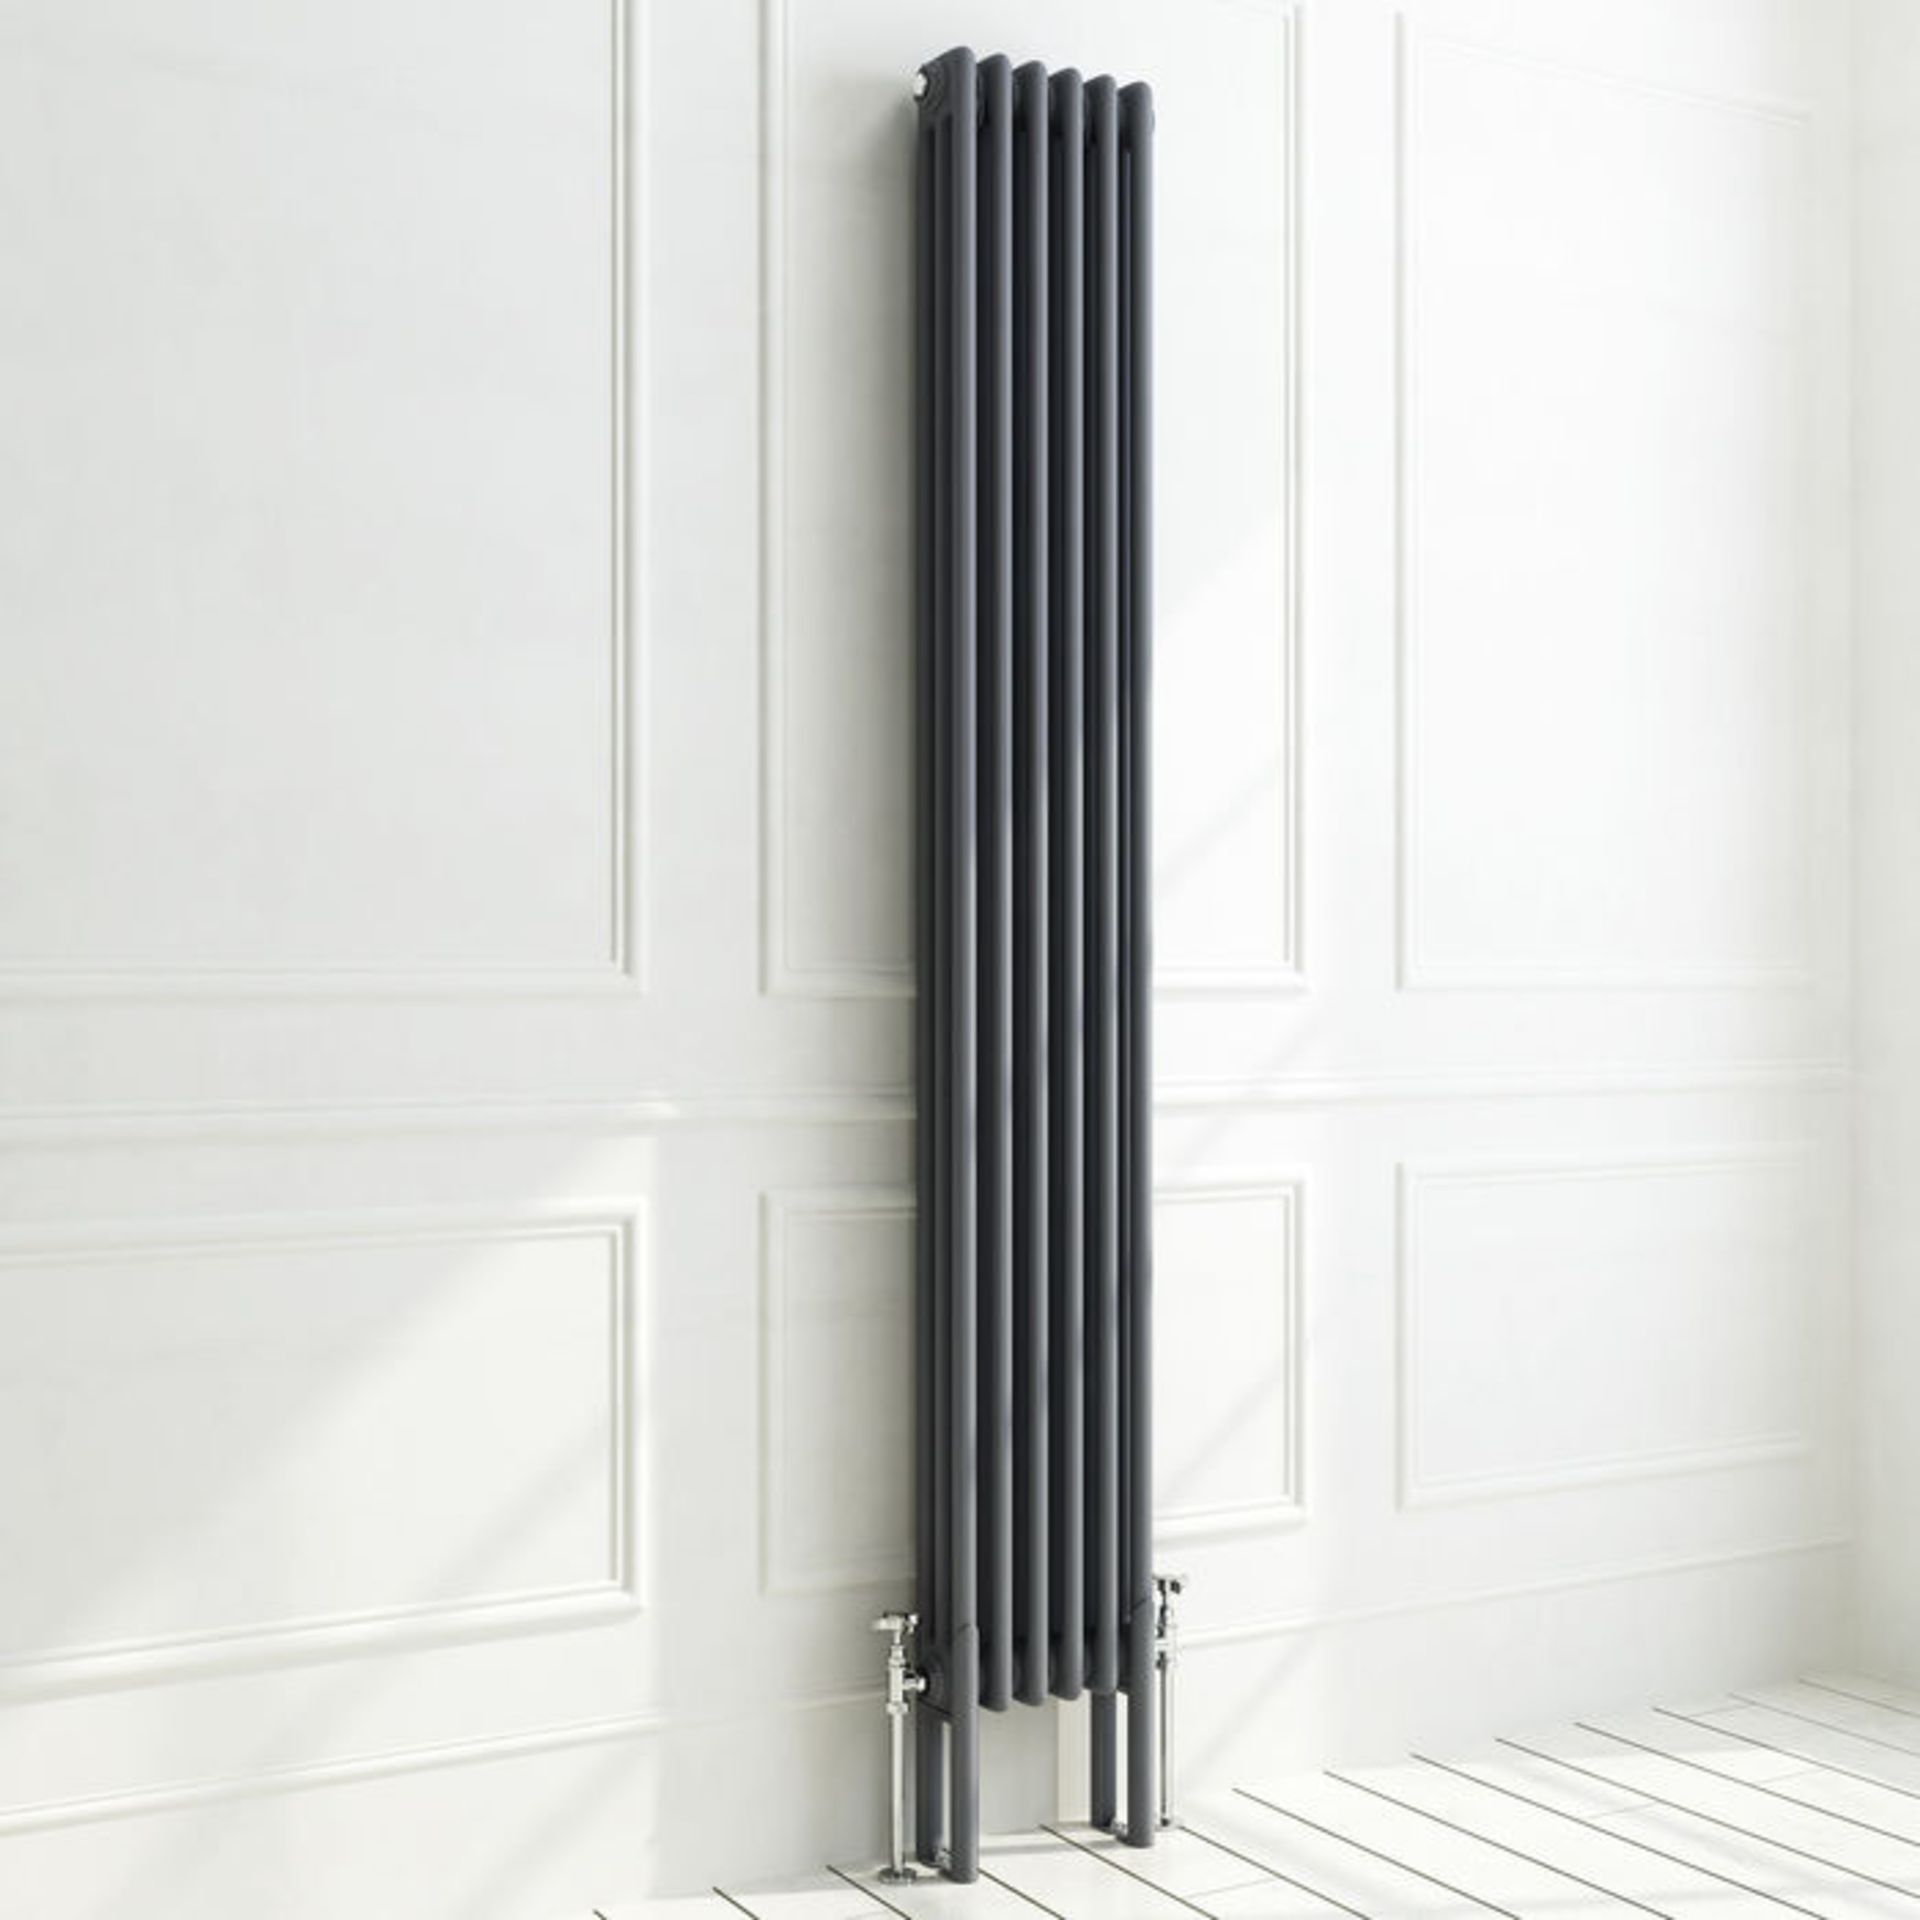 (MP40) 300x102 - Wall Mounting Feet For 3 Bar Radiators - Anthracite Can be used to floor mount - Image 3 of 3